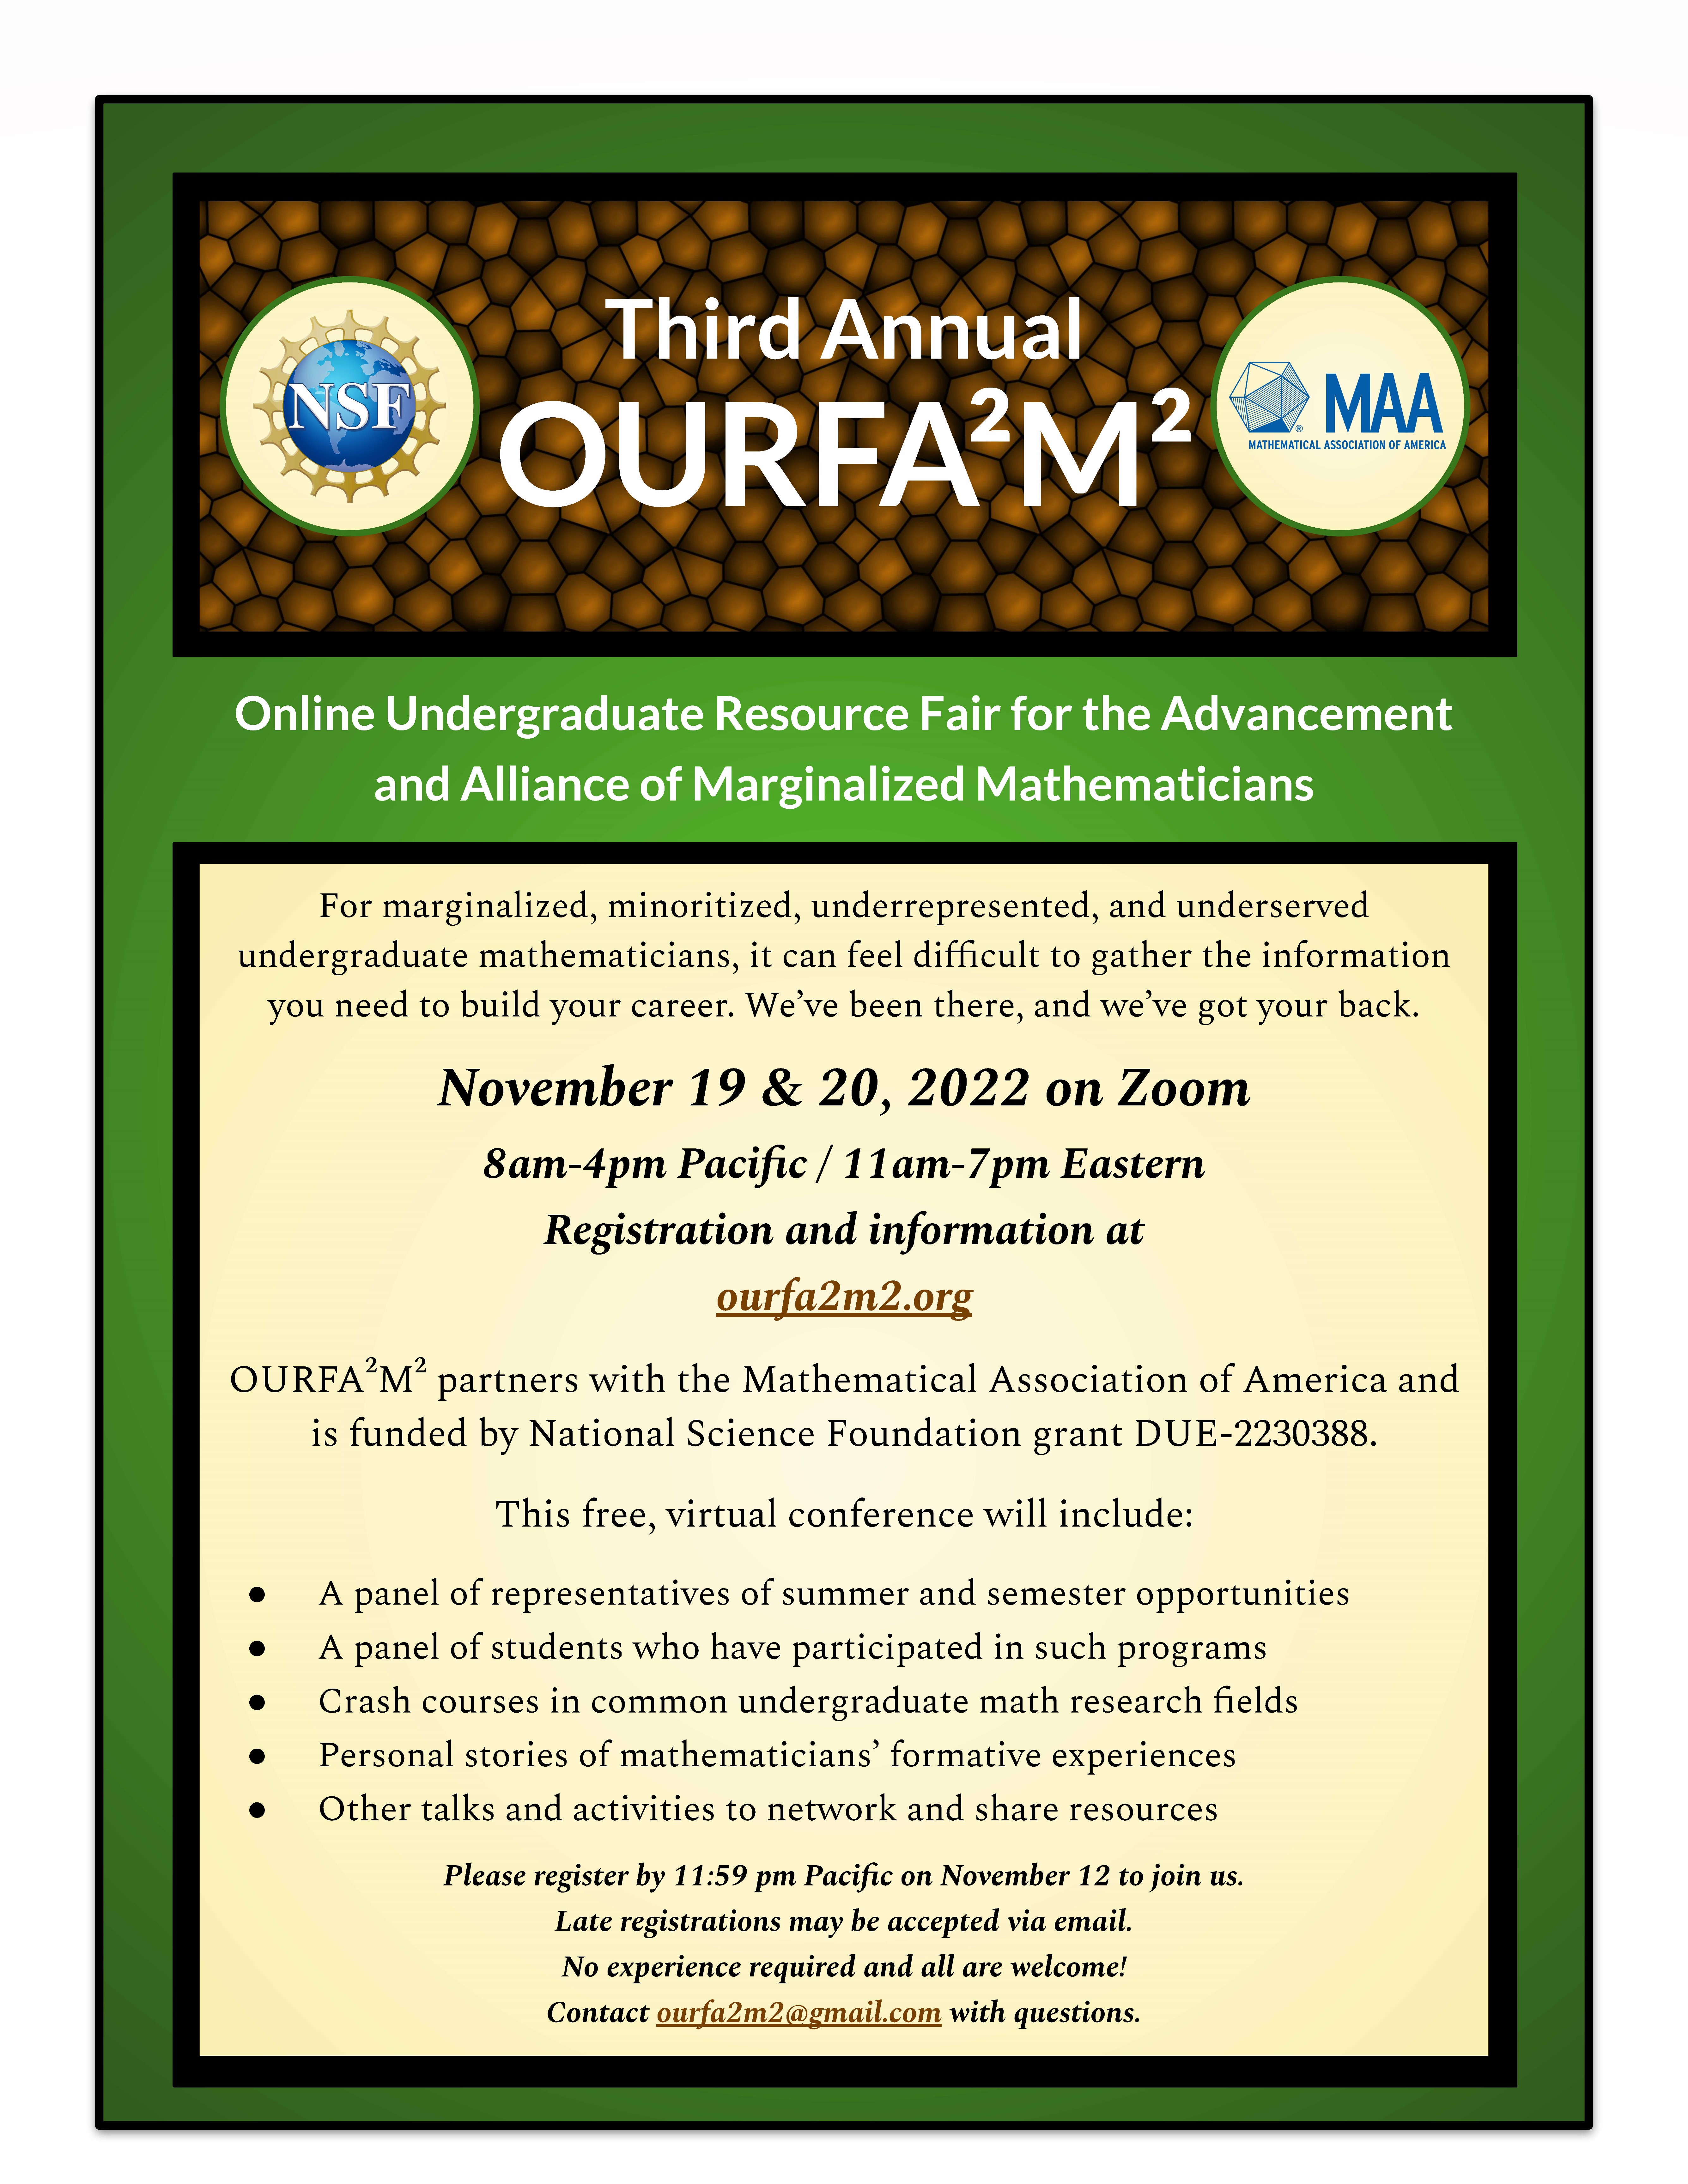 Online Undergraduate Resource Fair for the Advancement and Alliance of Marginalized Mathematicians 